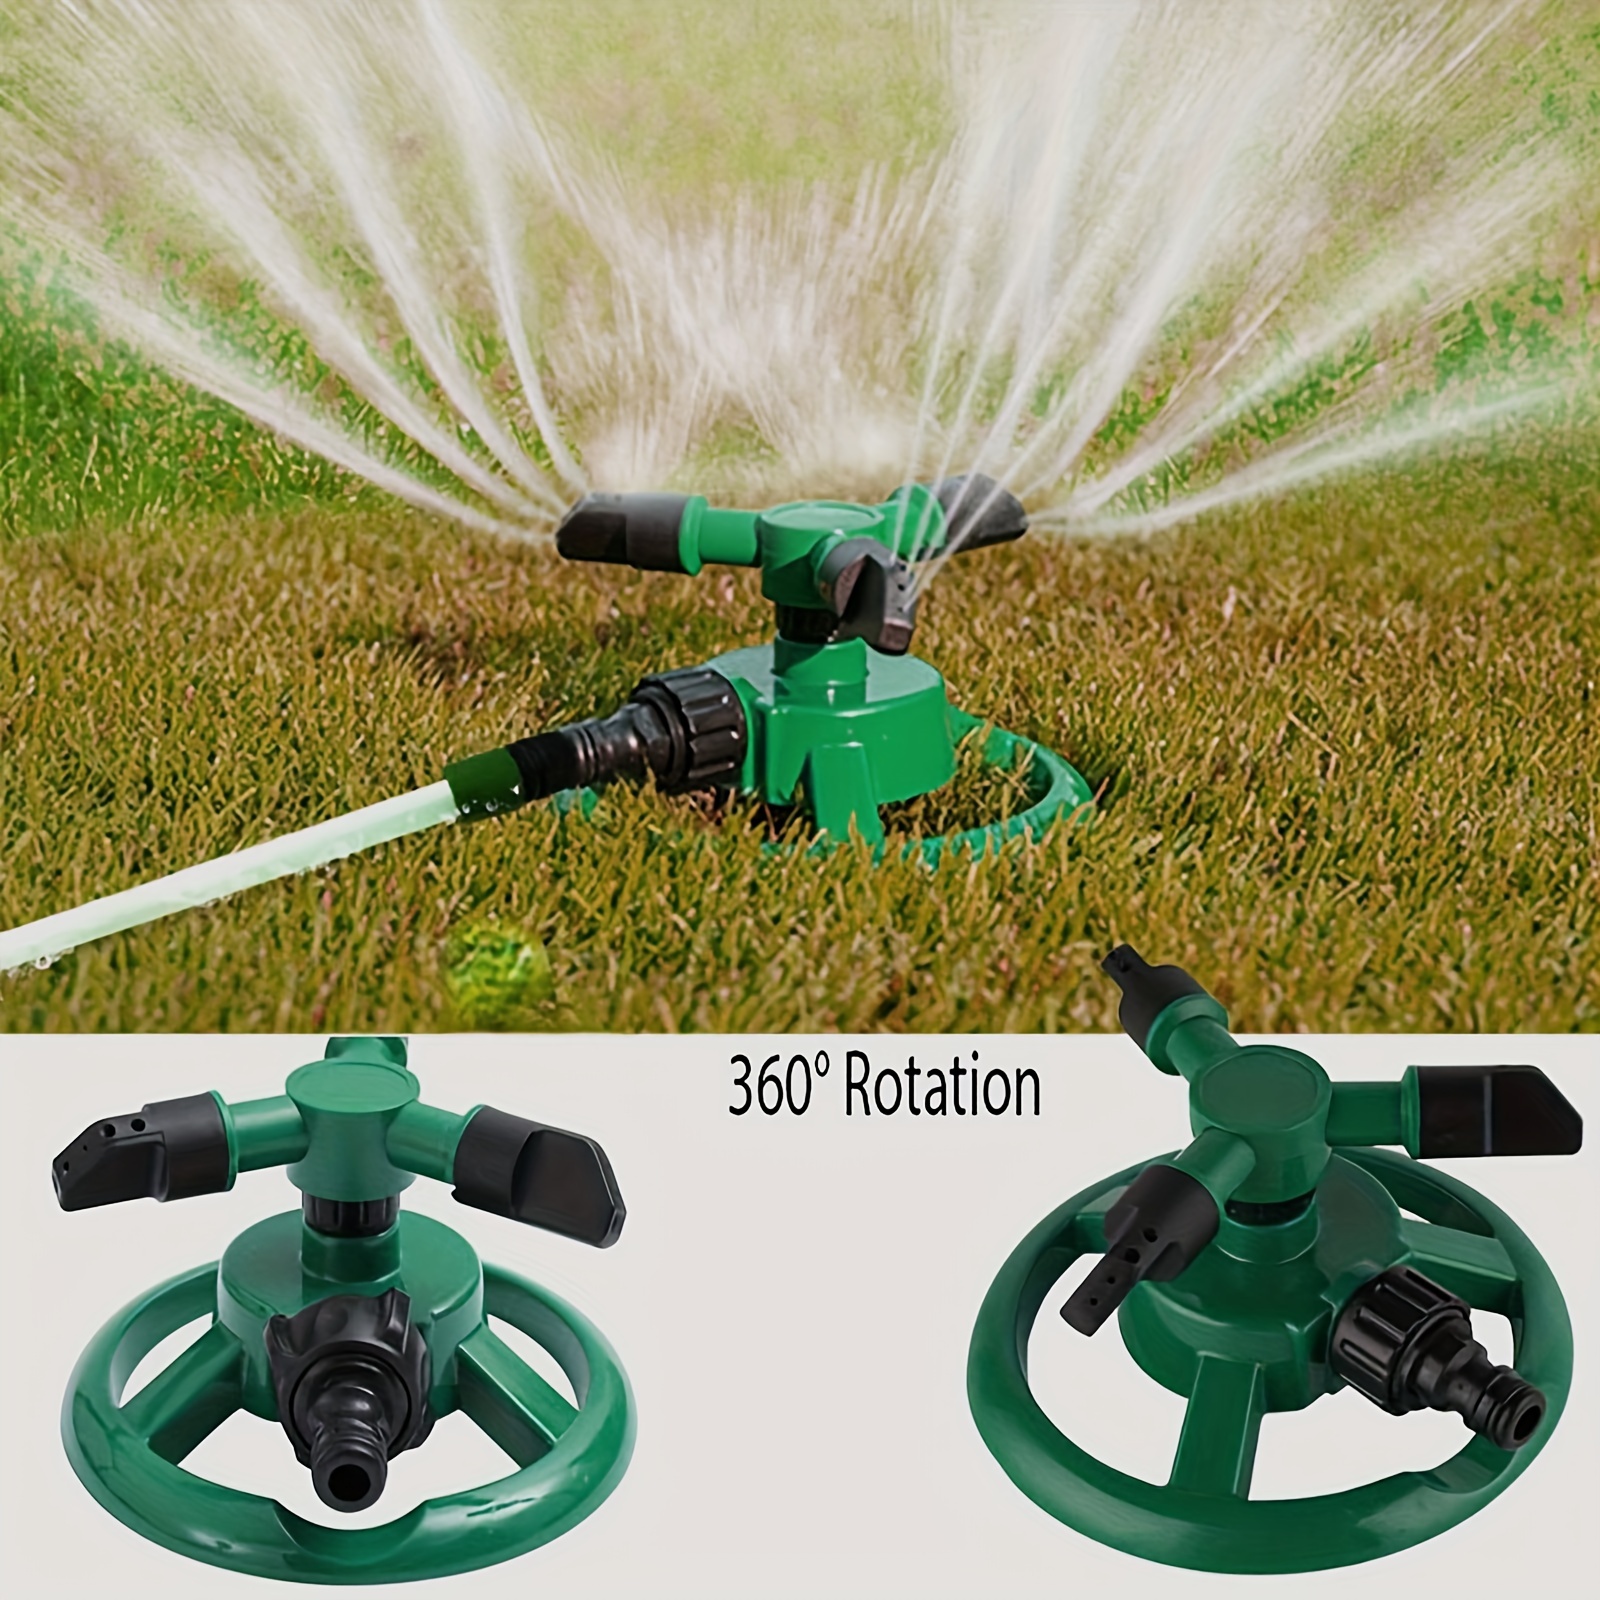 

1pc Plastic Sprinkler, Lawn Rotating Irrigation Sprinkler, Garden Sprinklers For Yard 360 Degree Rotating, Water Sprinklers, Multipurpose Yard Sprinklers For Plant Irrigation And Outdoor Watering